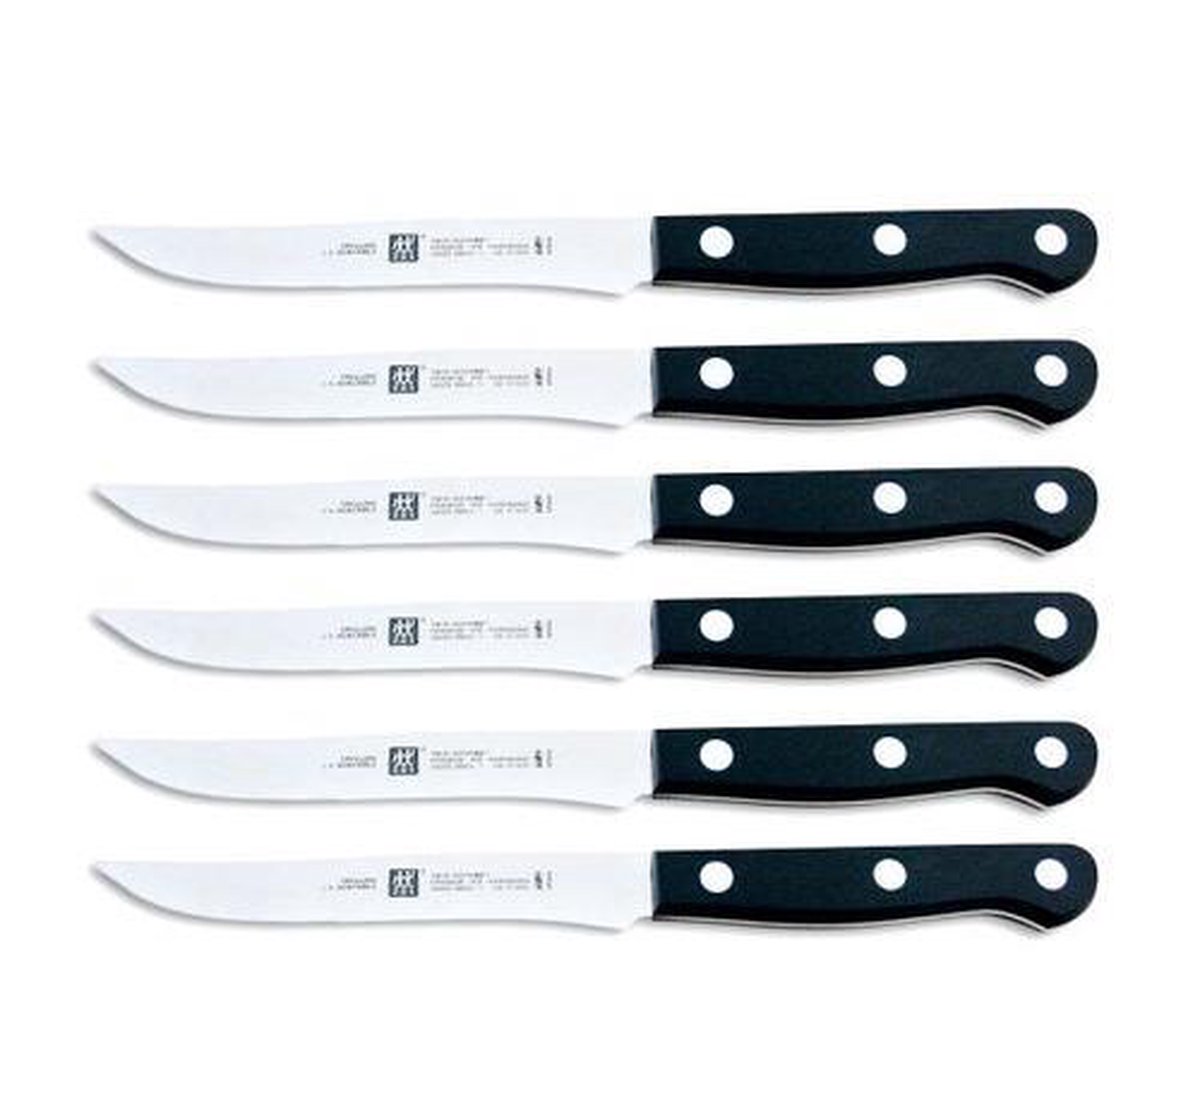 Zwilling Steakmes Twin Gourmet Steakmessenset 6 delig - Zwilling